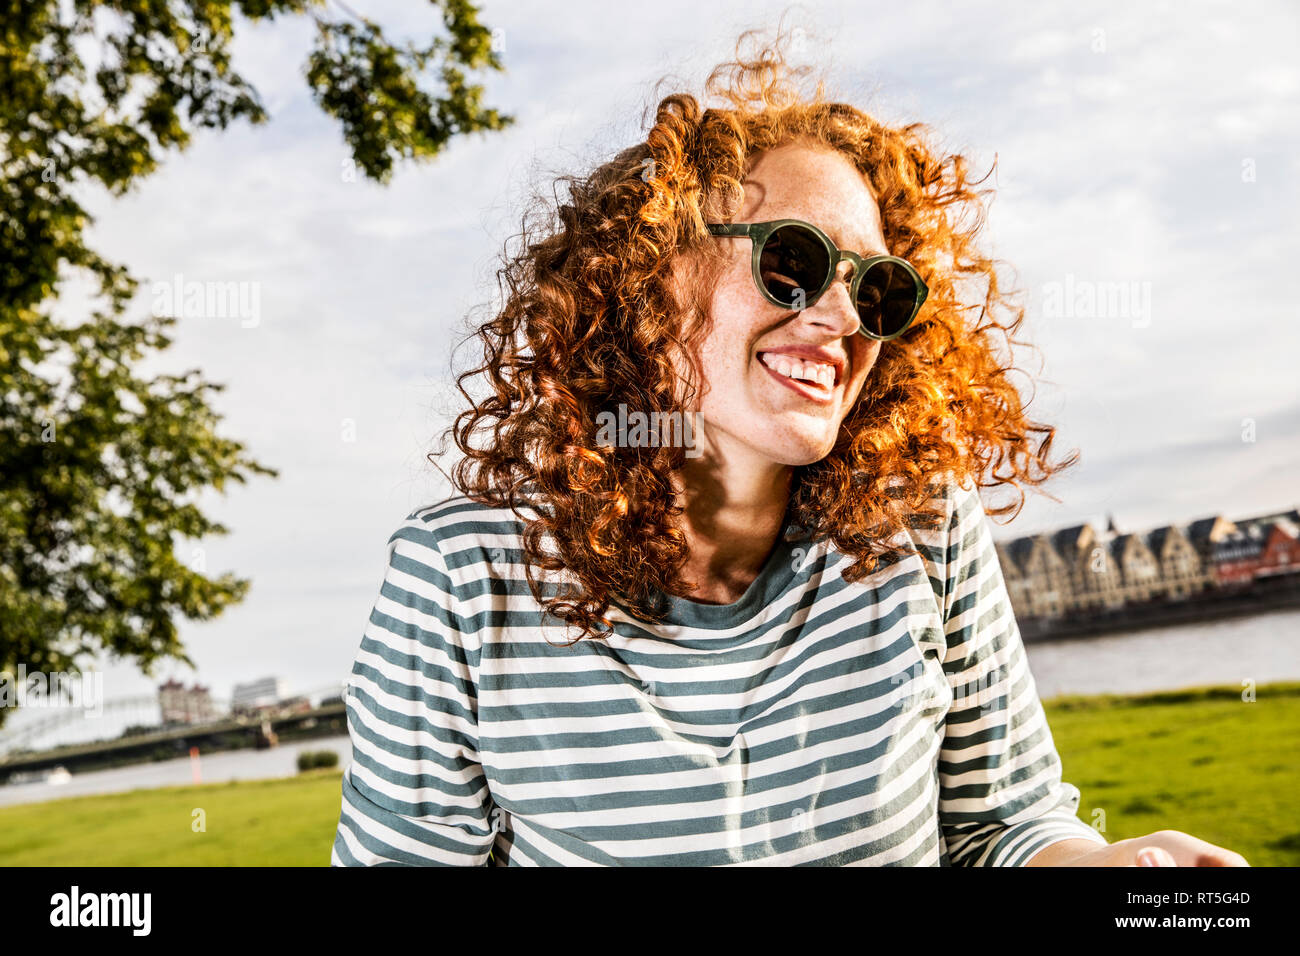 Germany, Cologne, portrait of laughing redheaded young woman wearing sunglasses Stock Photo